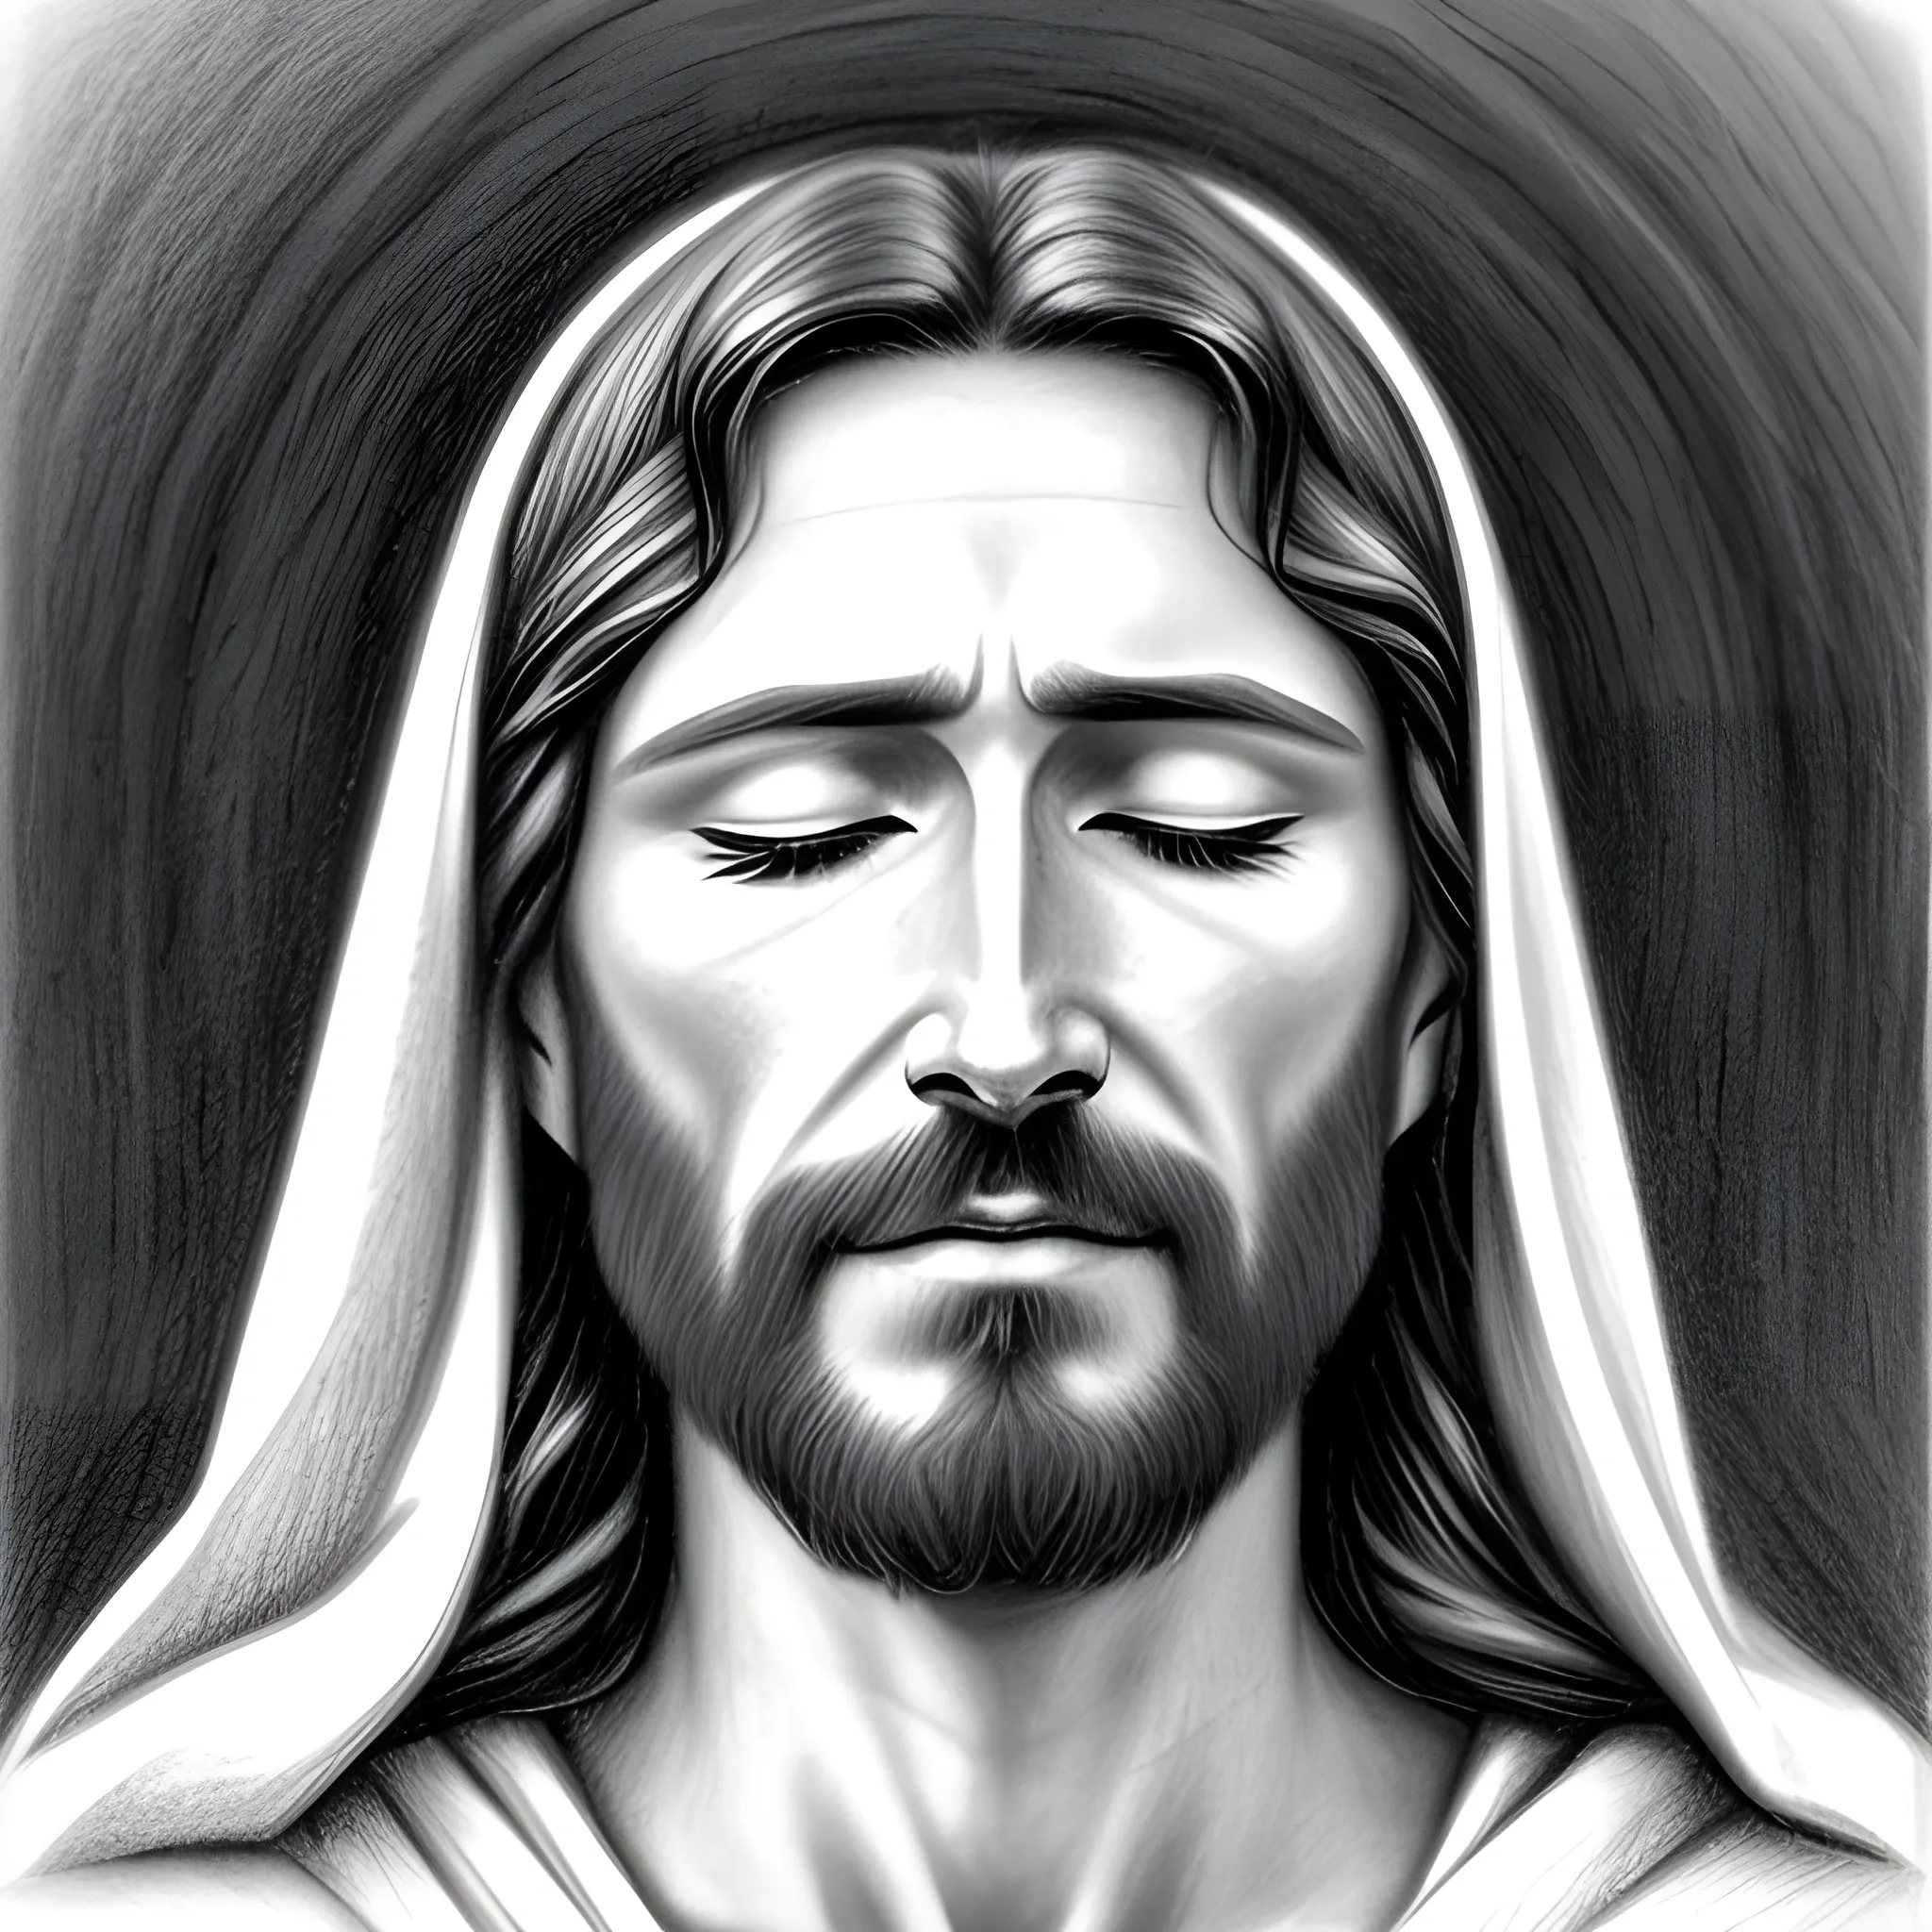 serene jesus christ, realistic, 4k, bright light face, close eyes, praying hands together in front of mouth, Pencil Sketch